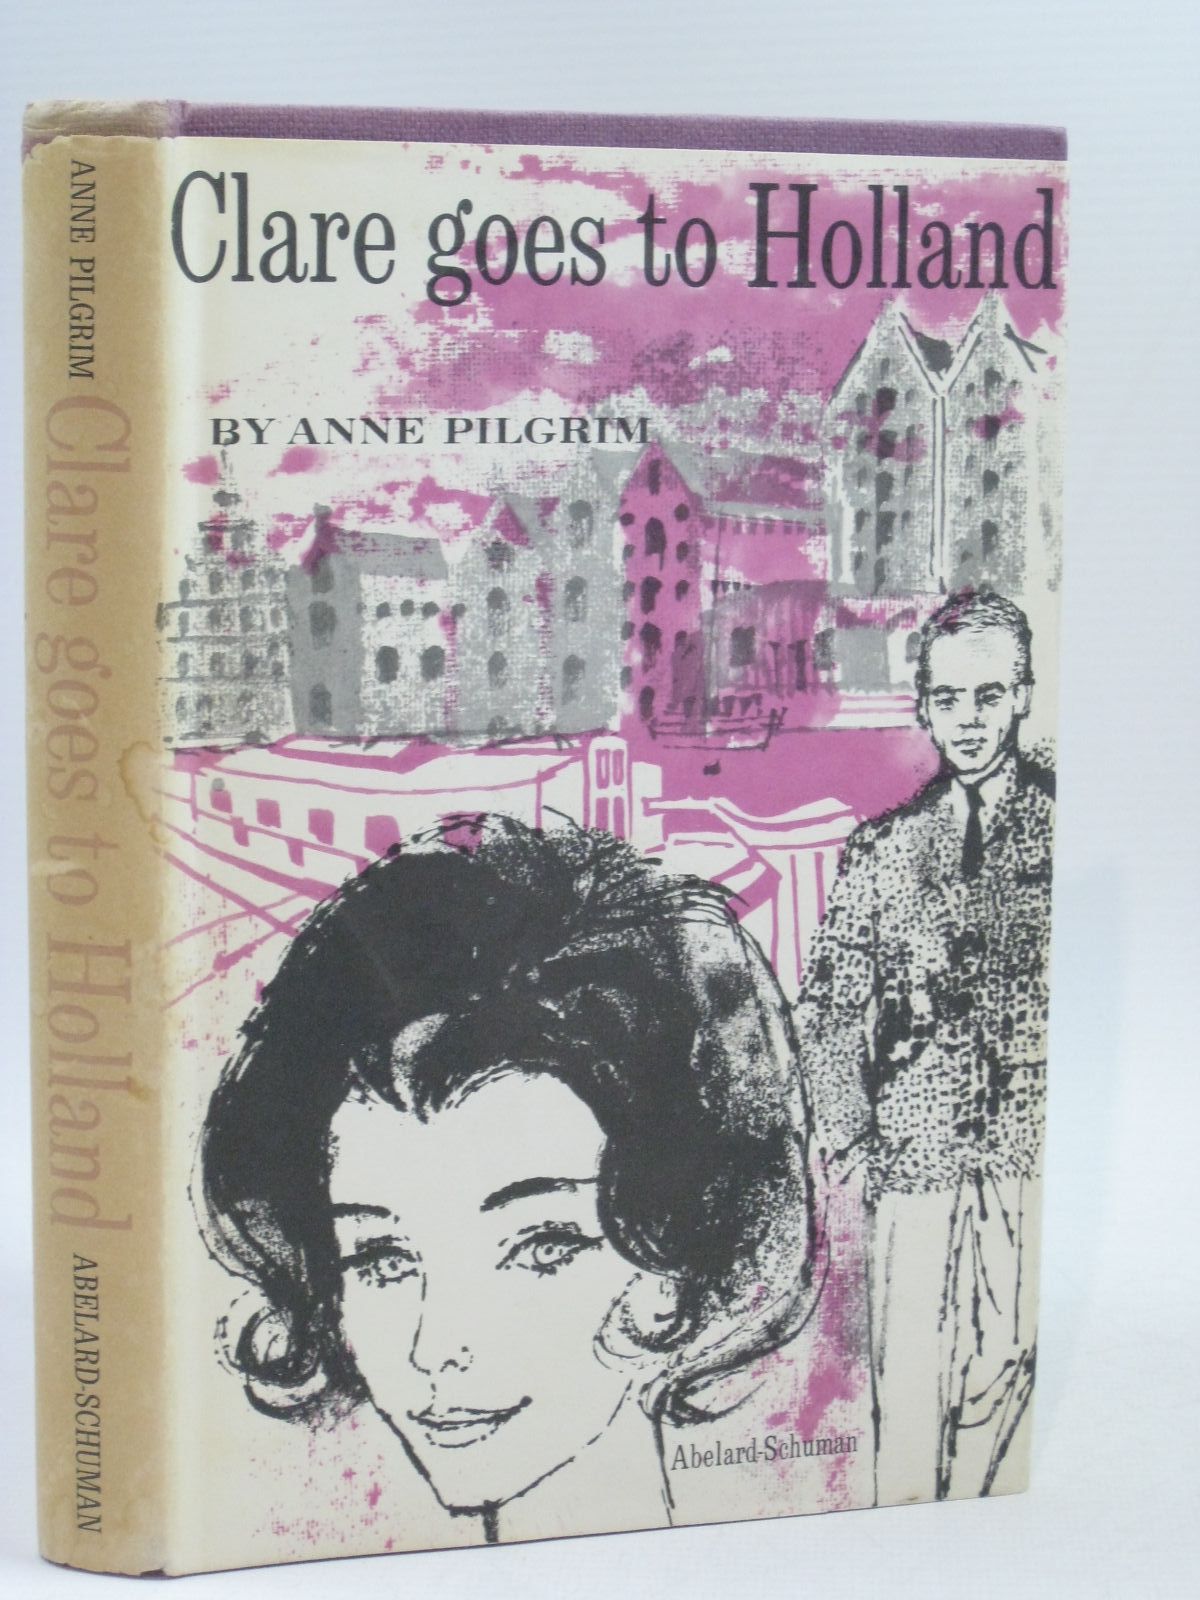 Cover of CLARE GOES TO HOLLAND by Anne Pilgrim; Mabel Esther Allan